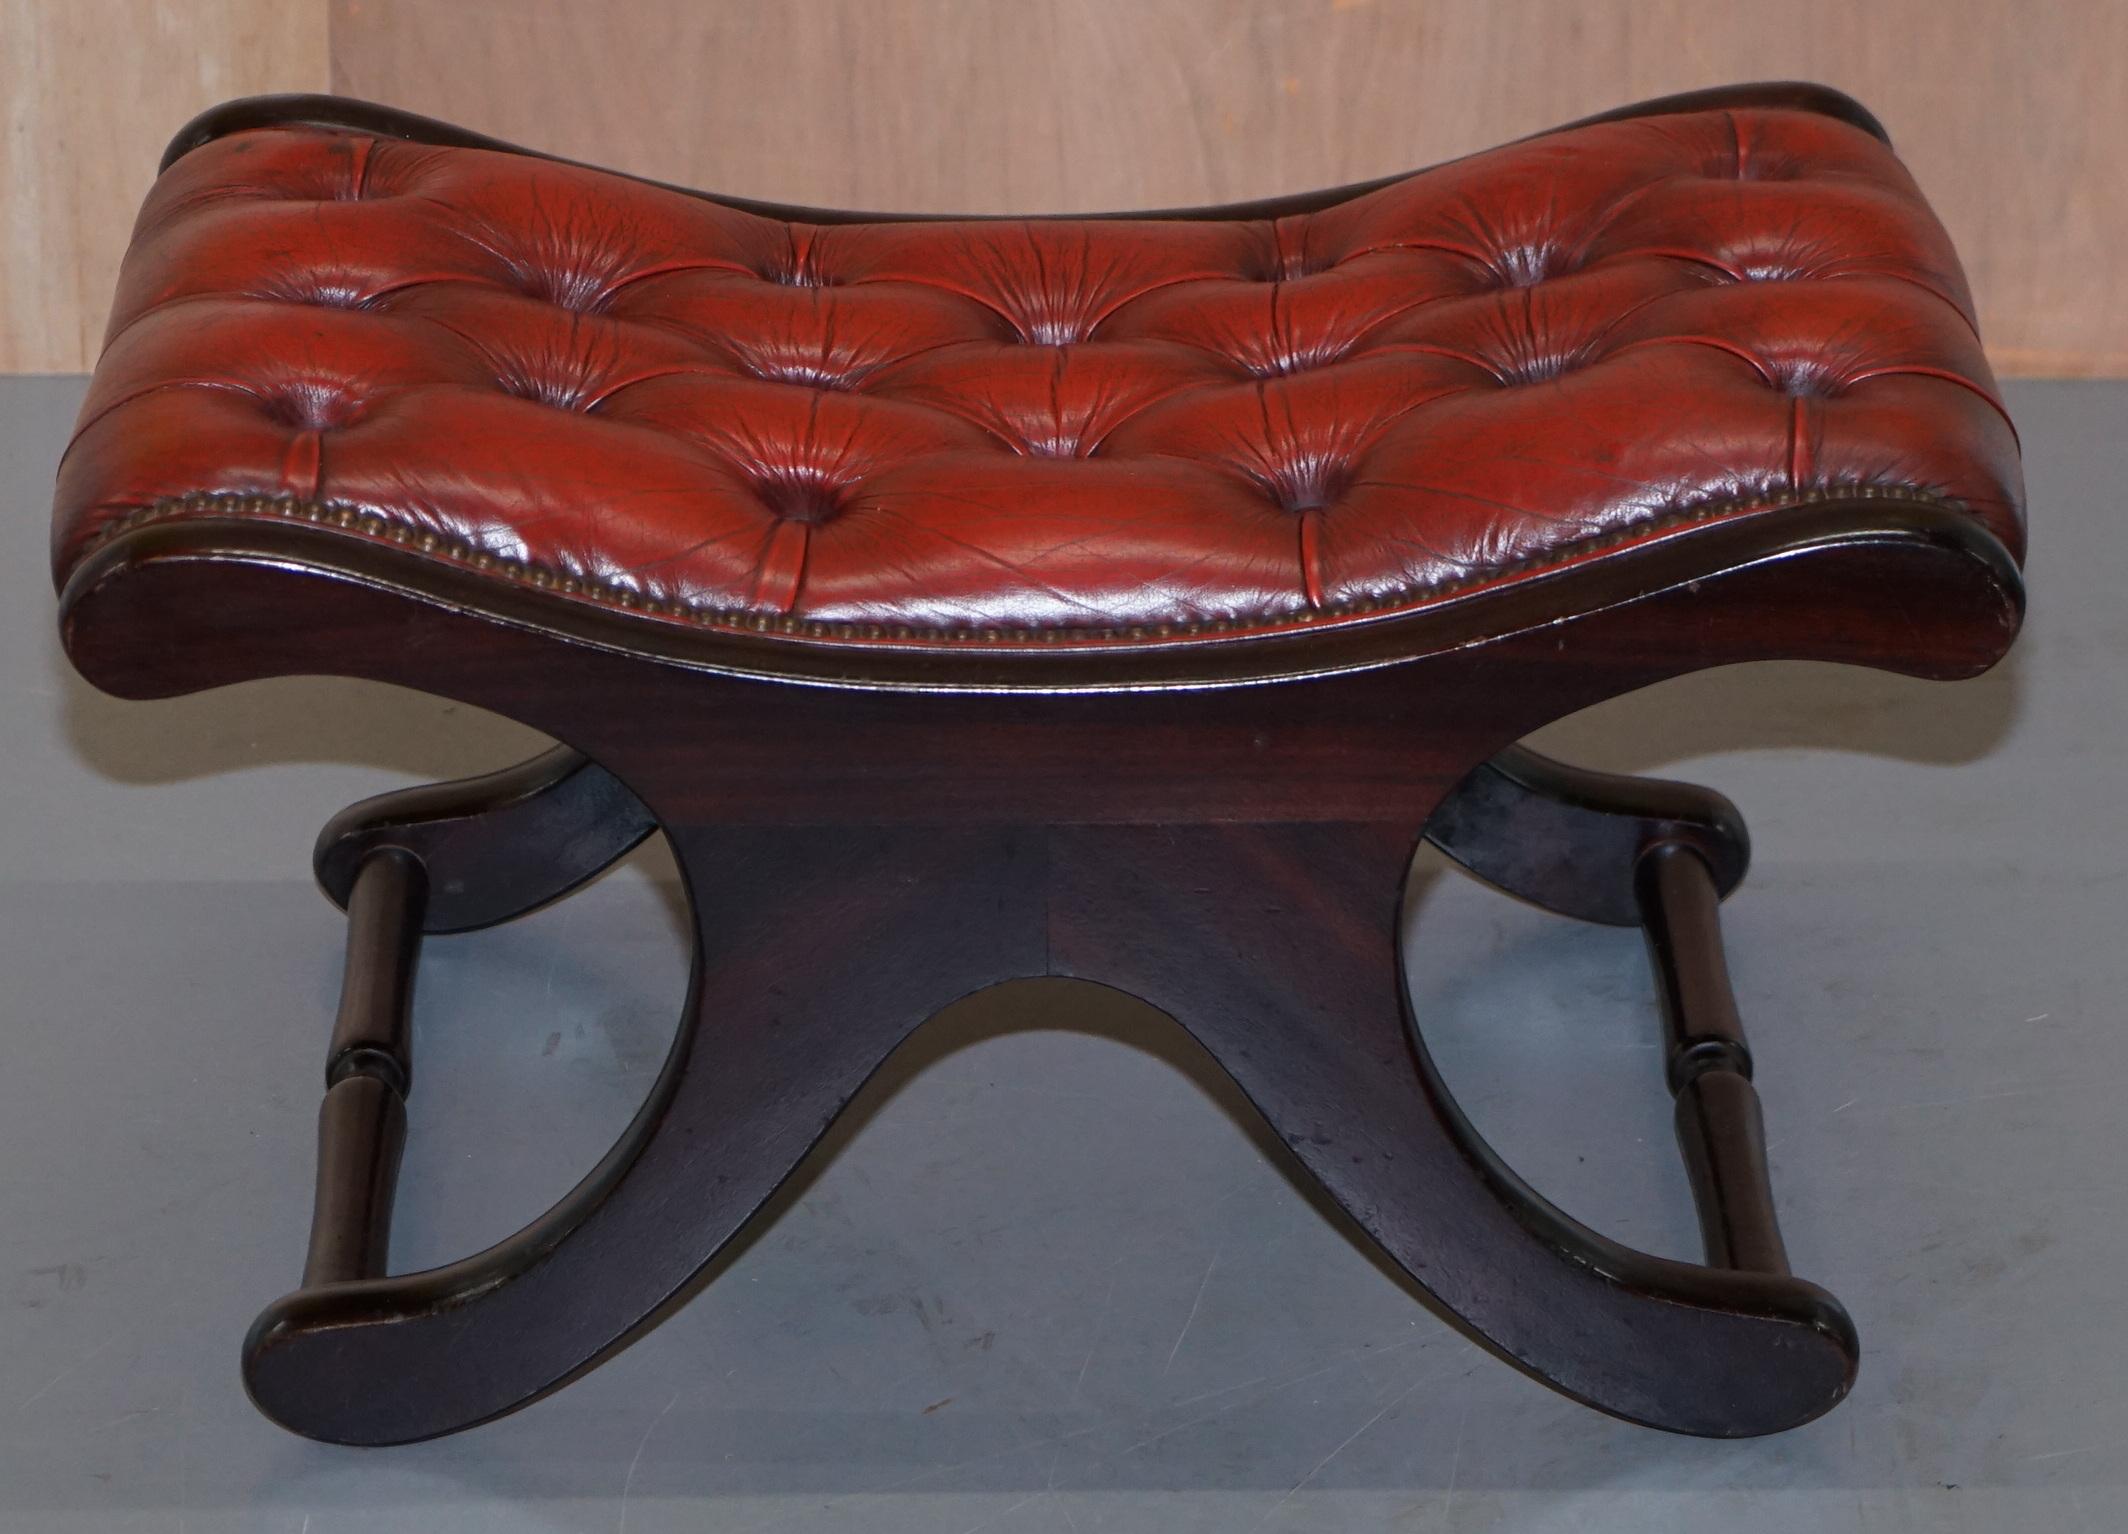 We are delighted to offer for sale this lovely Chesterfield oxblood leather and mahogany footstool

A good looking and well made stool, its very comfortable, the leather is soft and subtle, the mahogany frame solid

We have cleaned waxed and